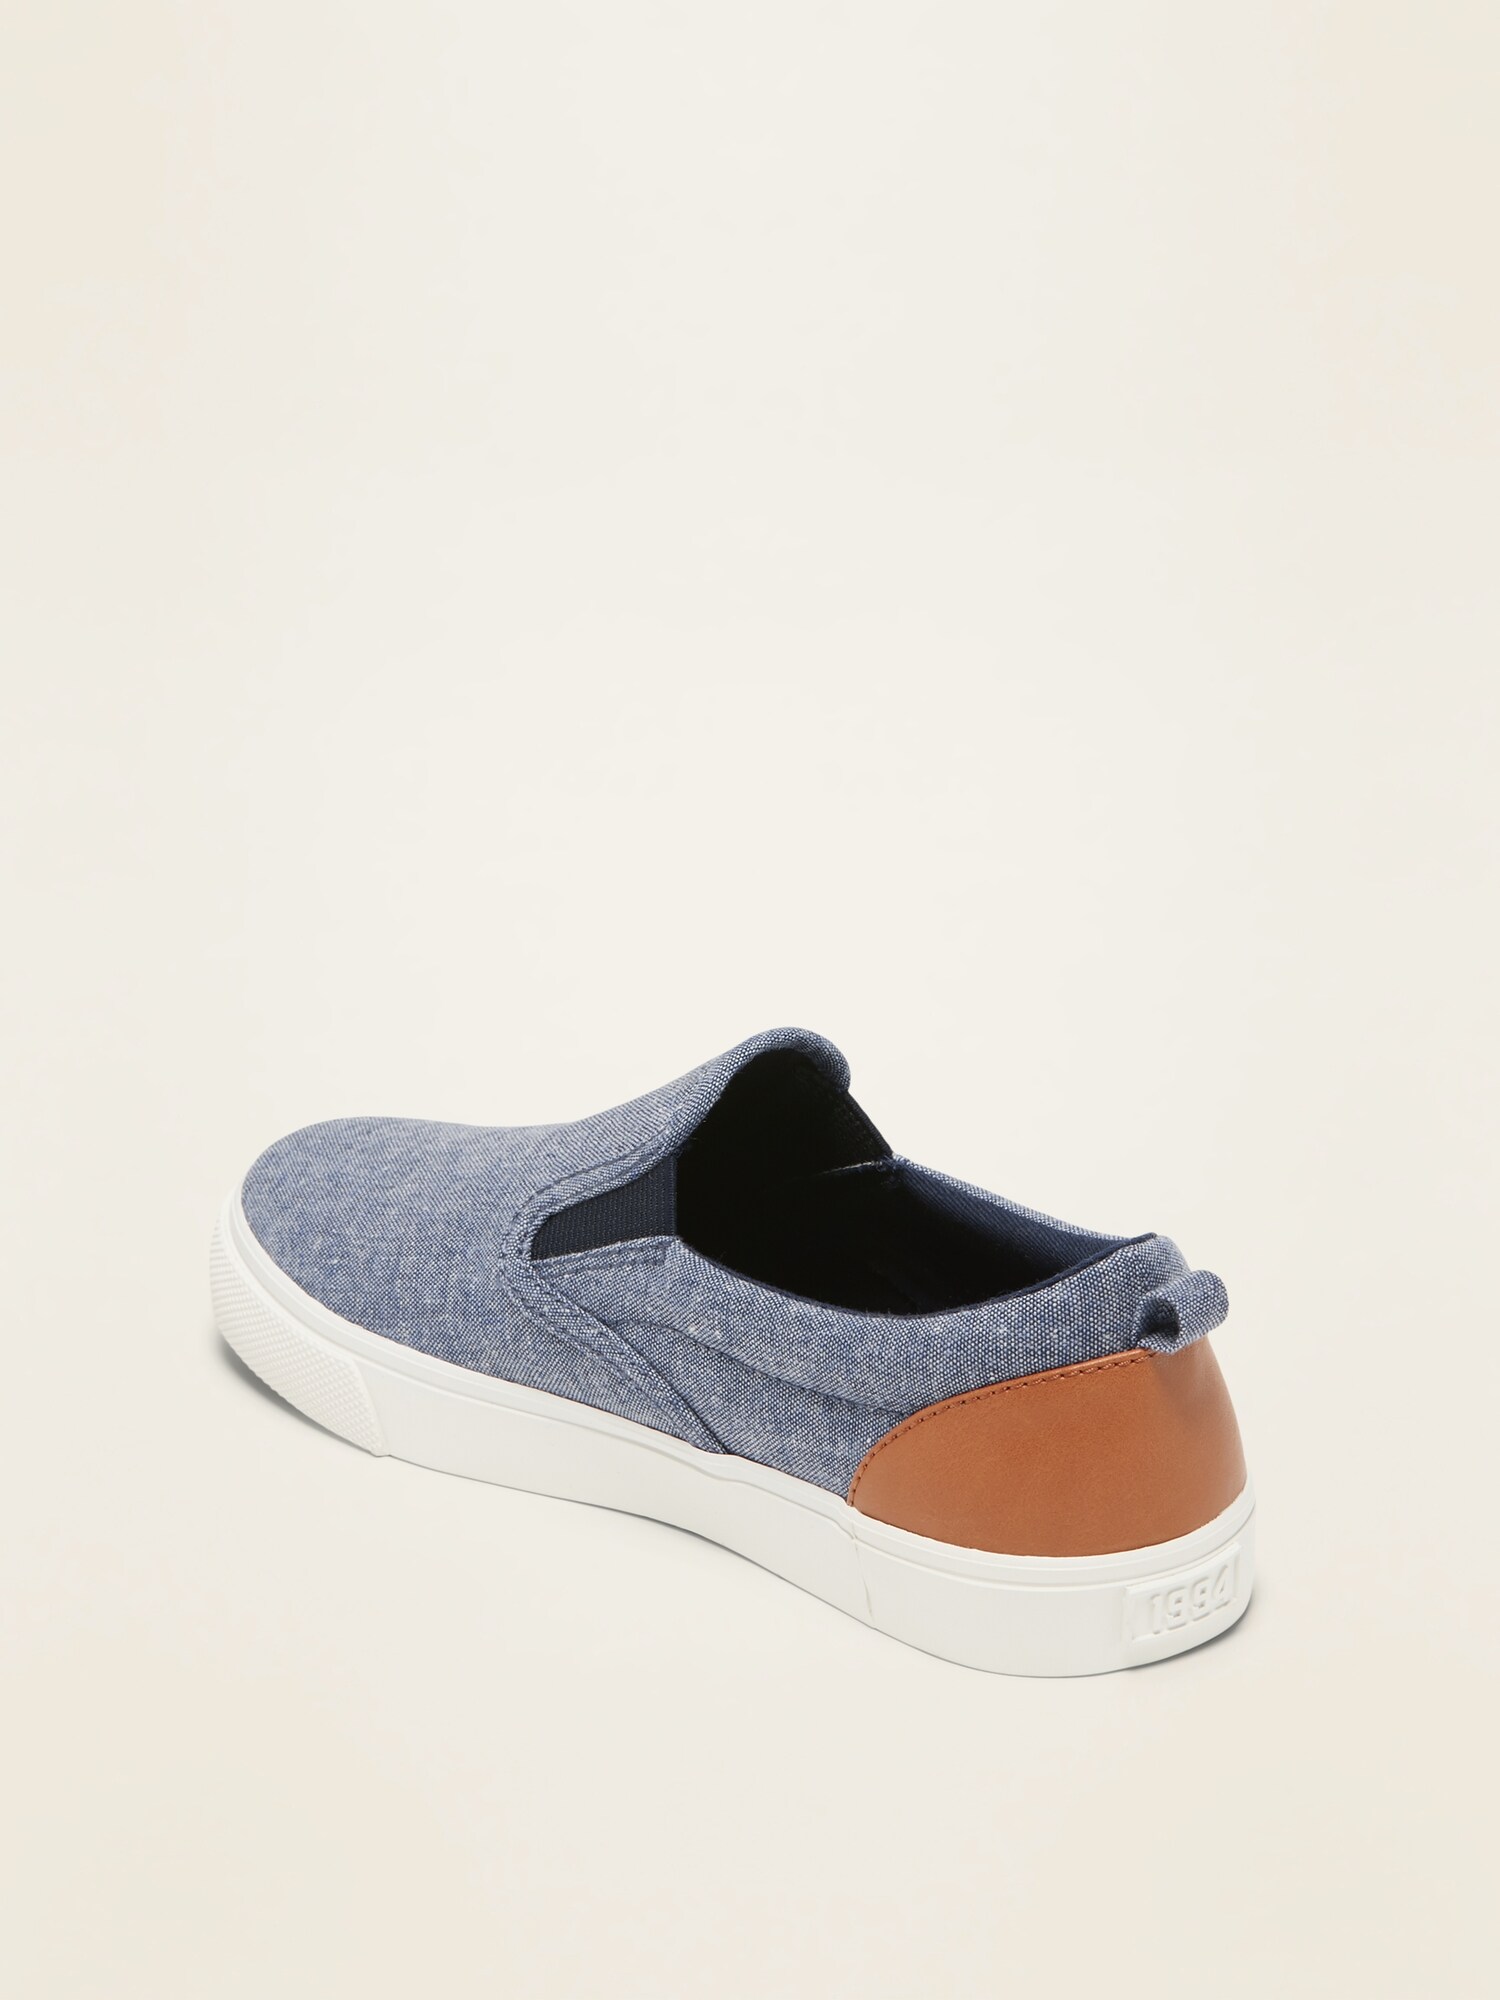 old navy boys slip on shoes